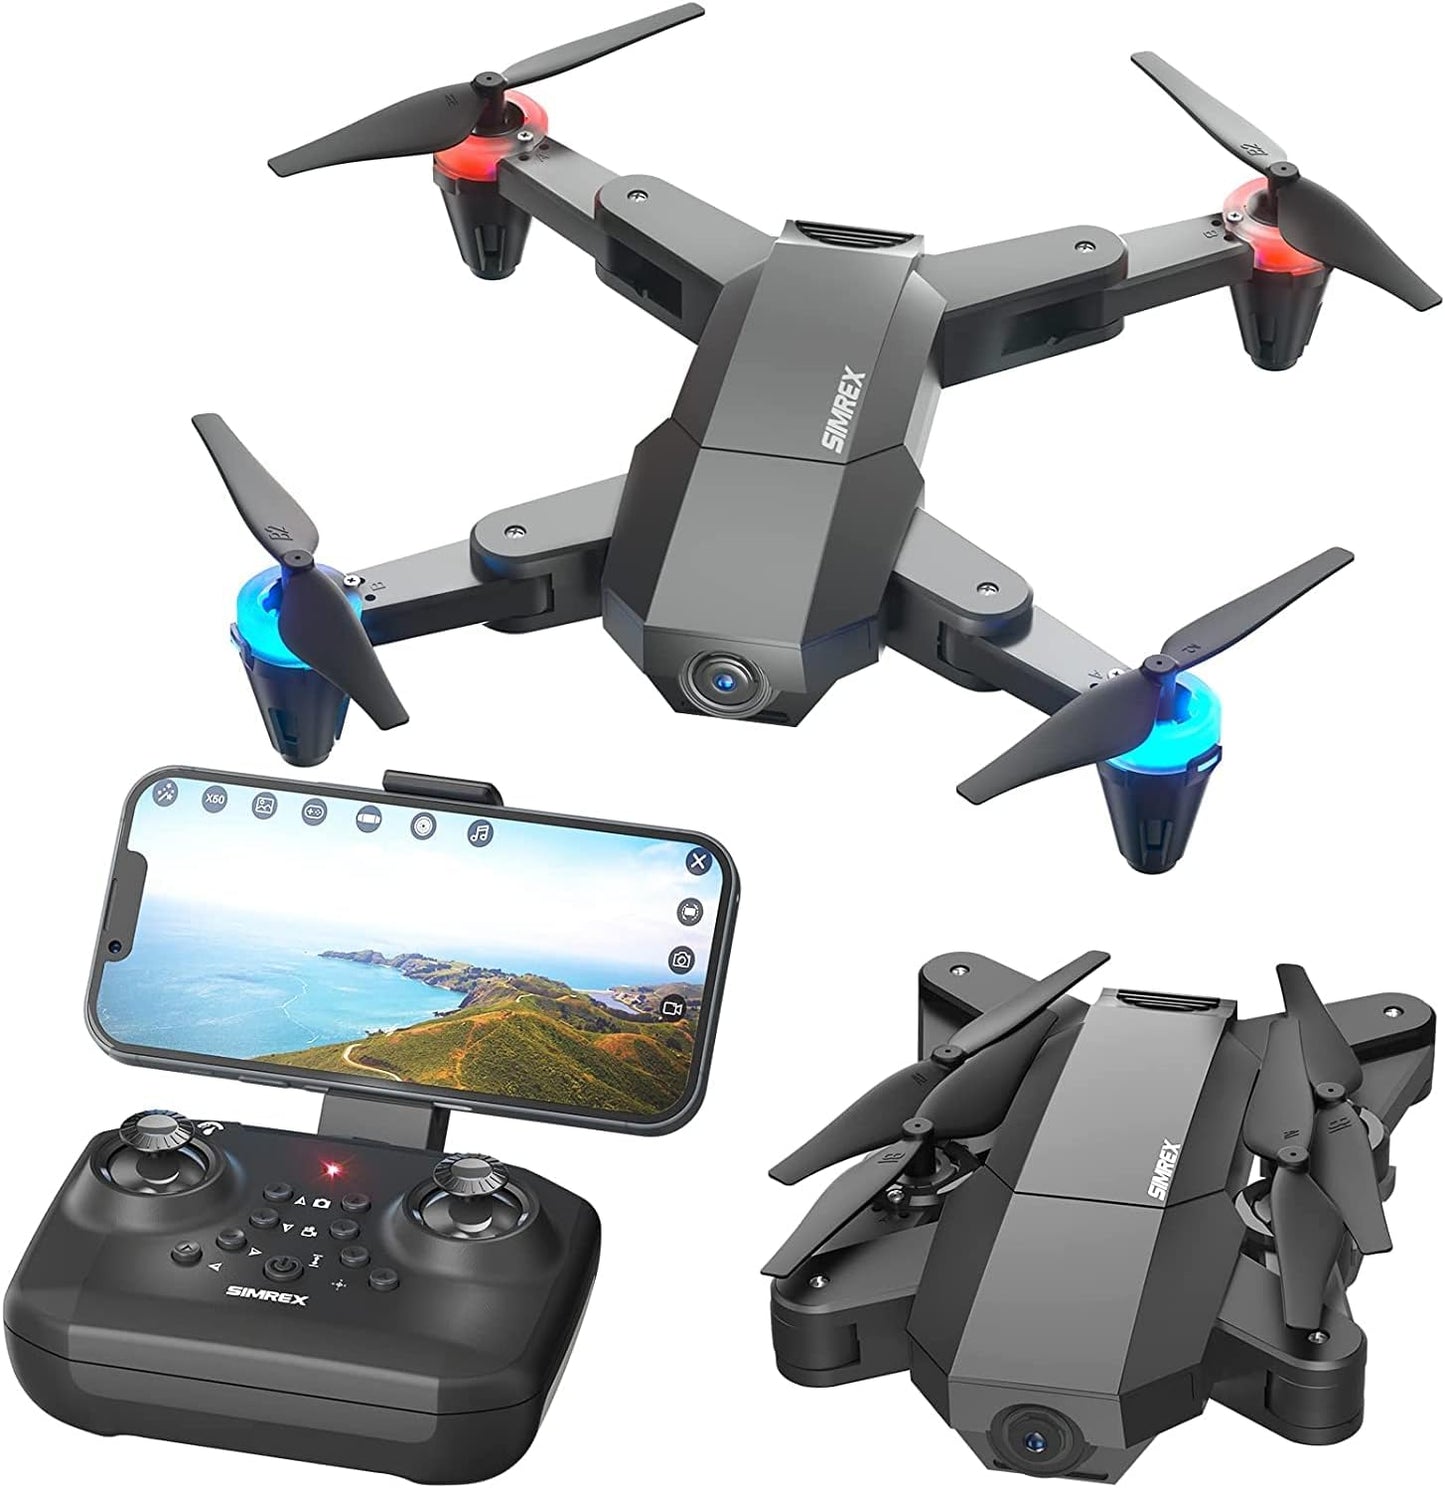 SIMREX X500 mini Drone Optical Flow Positioning RC Quadcopter with 720P HD Camera, Altitude Hold Headless Mode, Foldable FPV Drones WiFi Live Video 3D Flips Easy Fly Steady for Learning